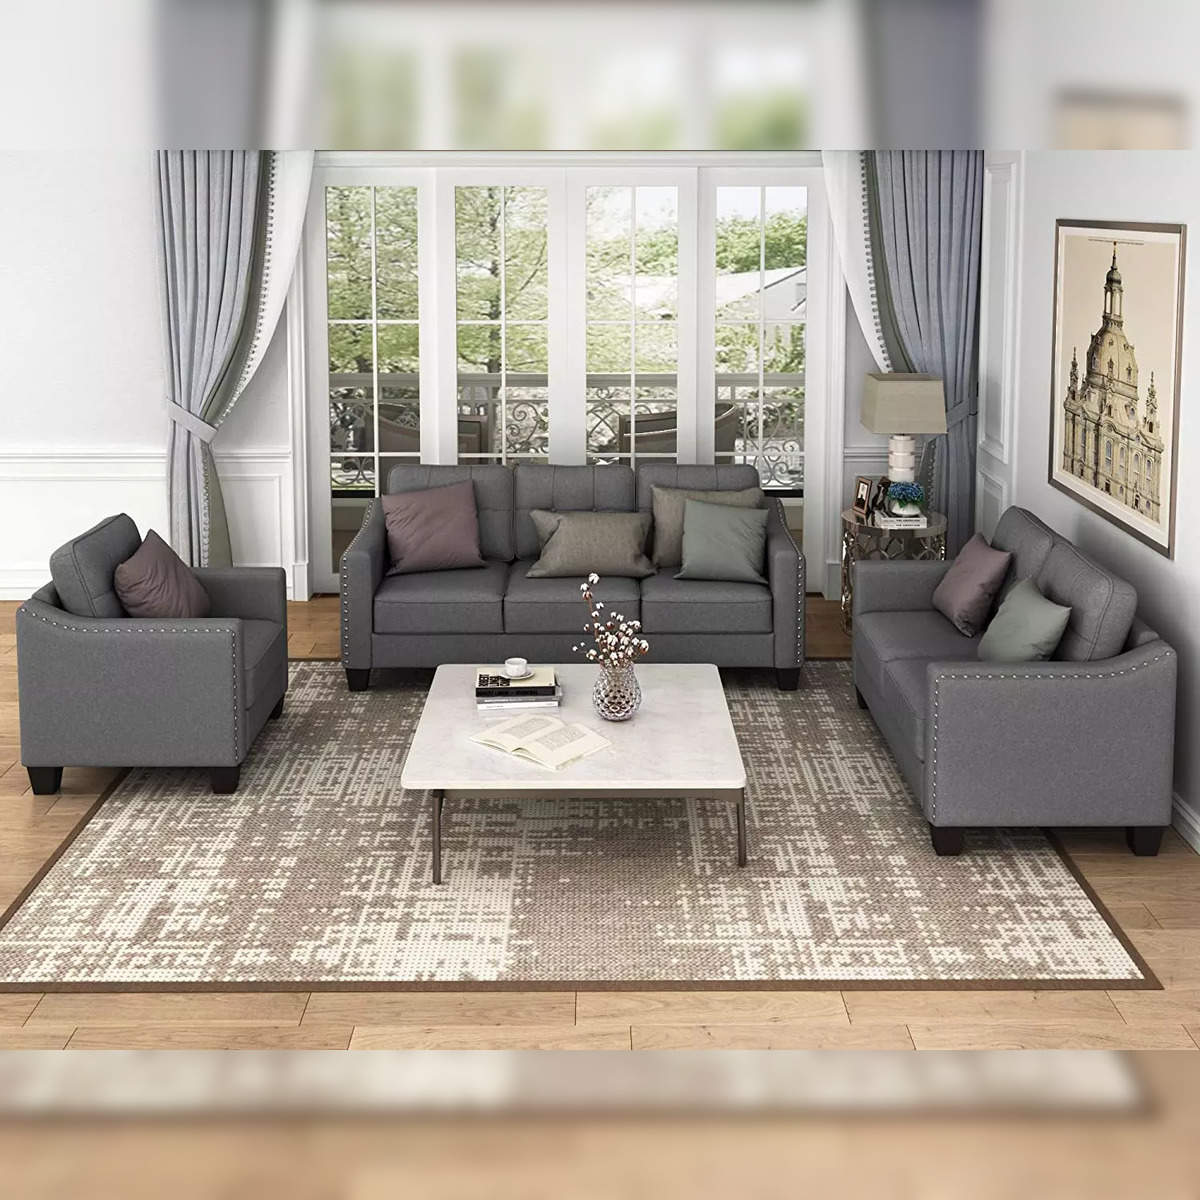 3 Piece Sofa Set Best To Upgrade Your Living Room The Economic Times